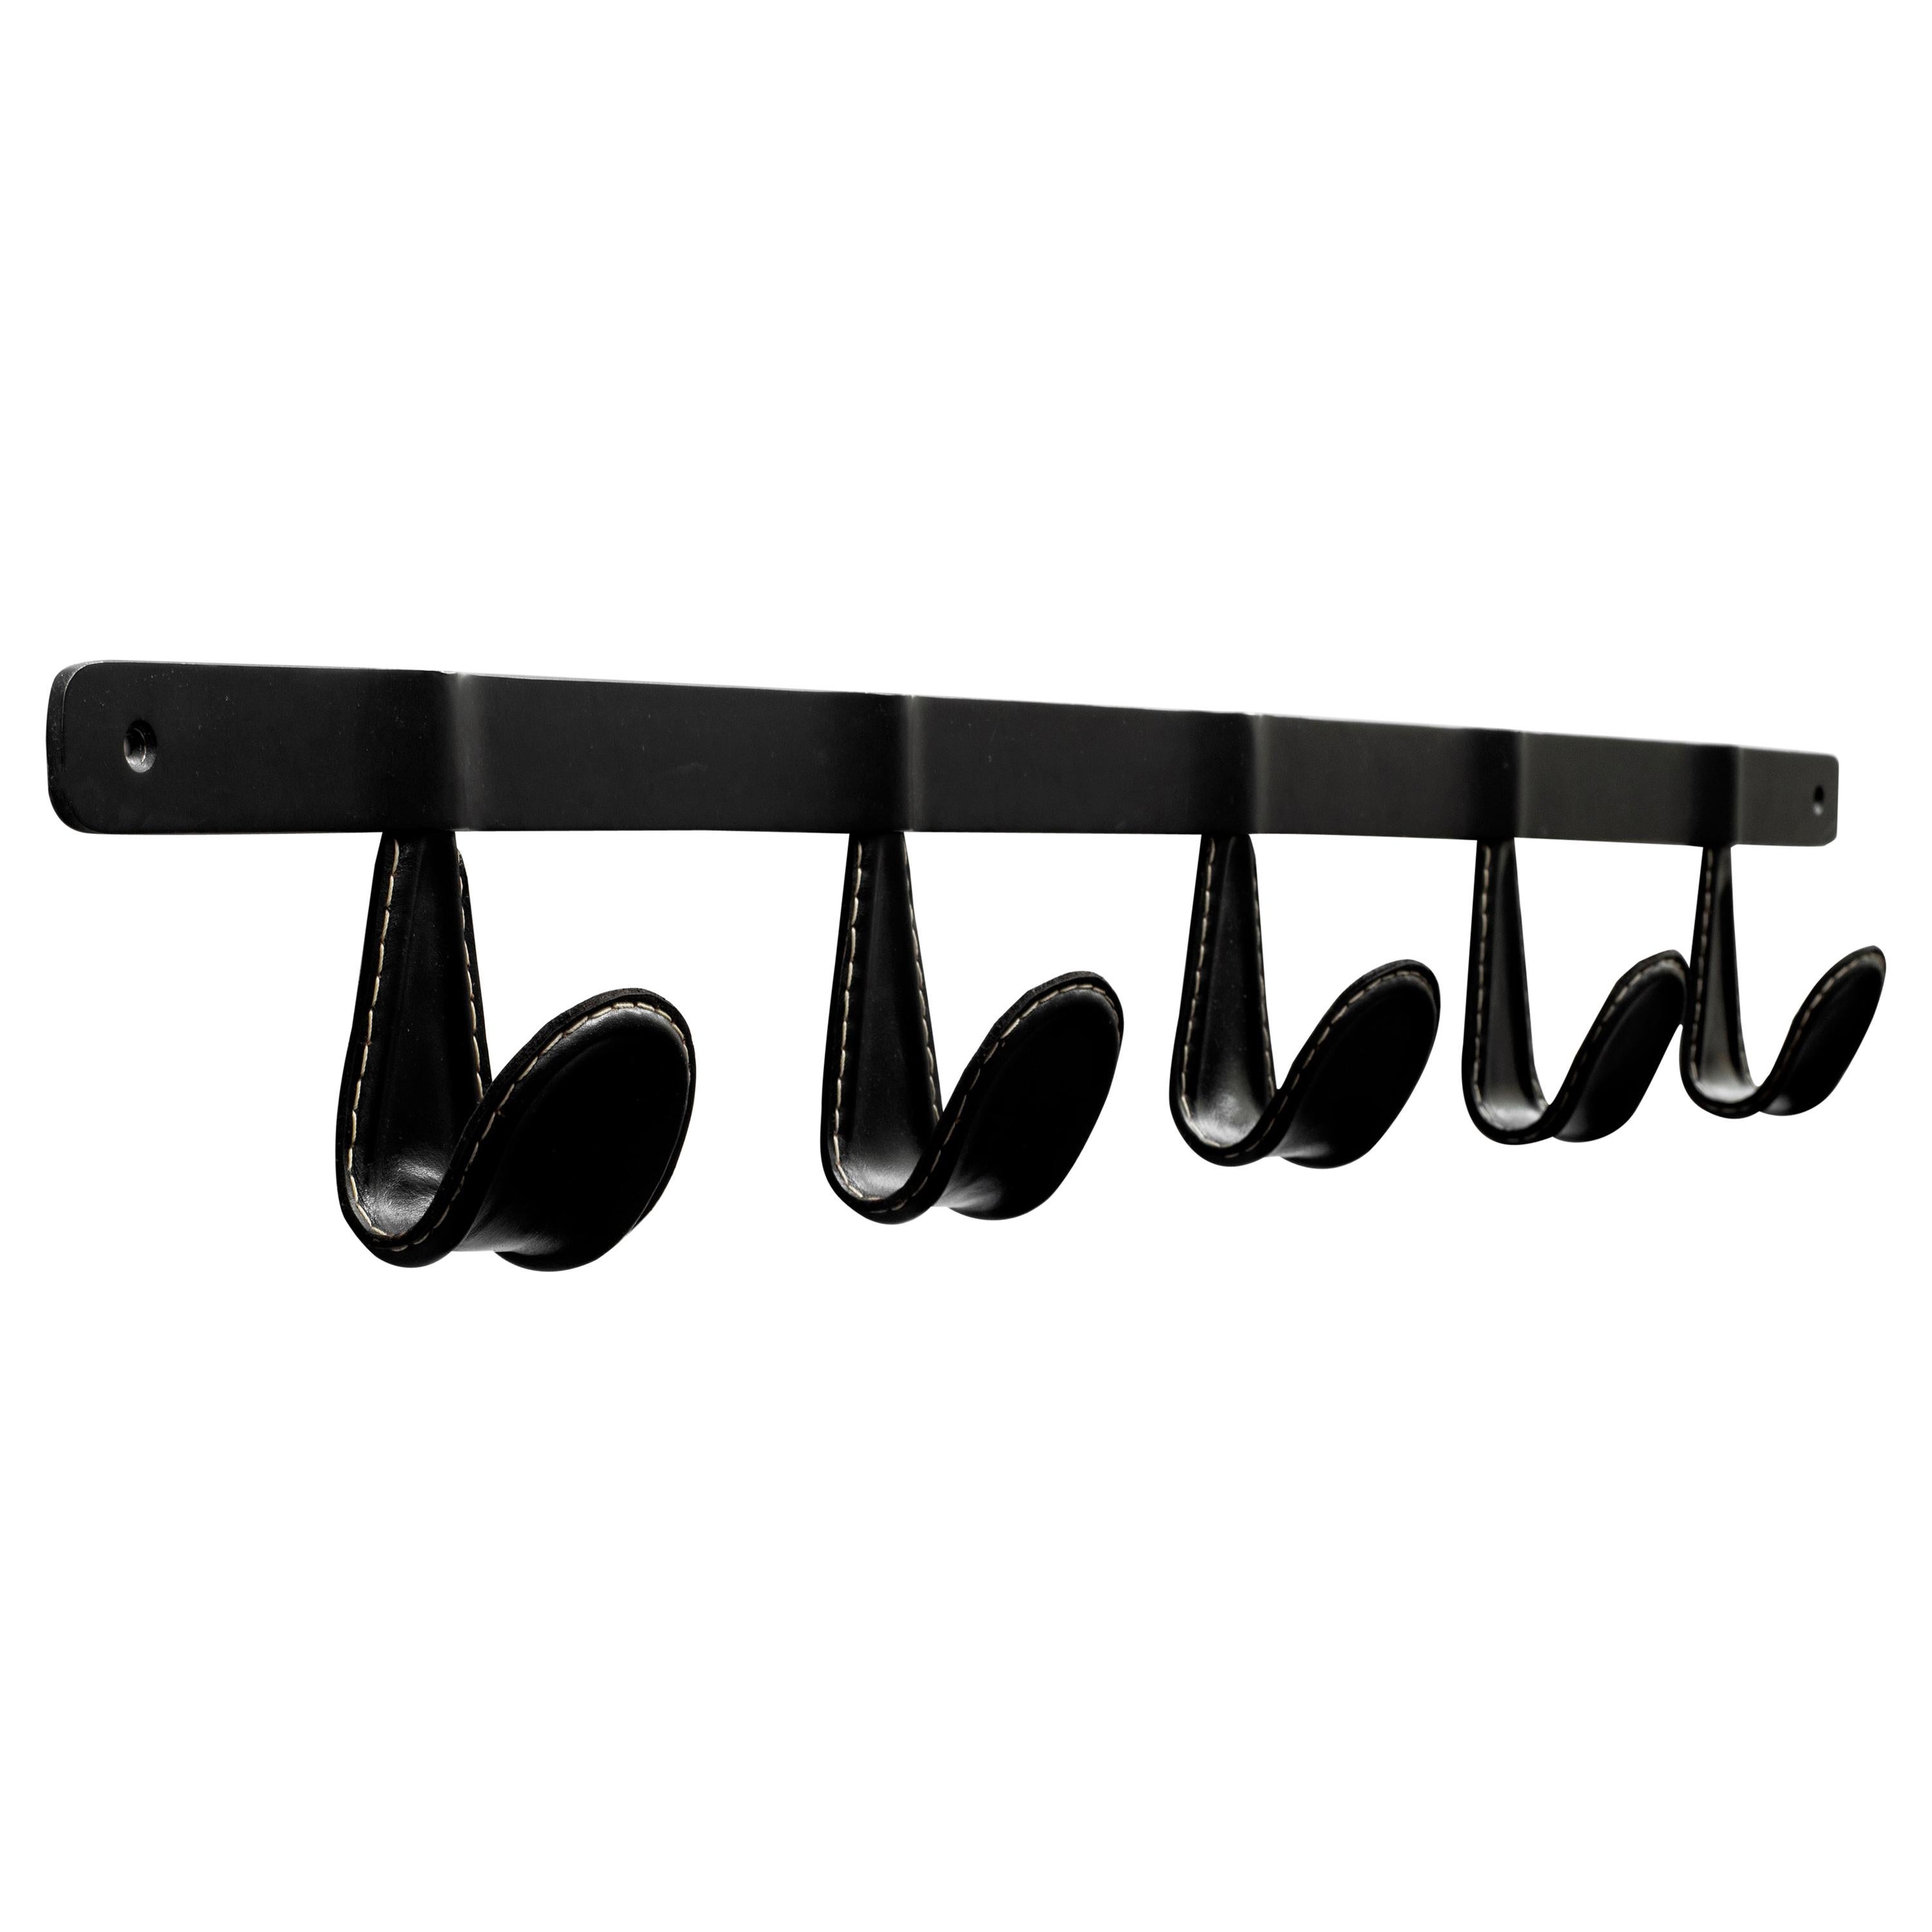 Atelier Iron and Leather Coat Rack For Sale